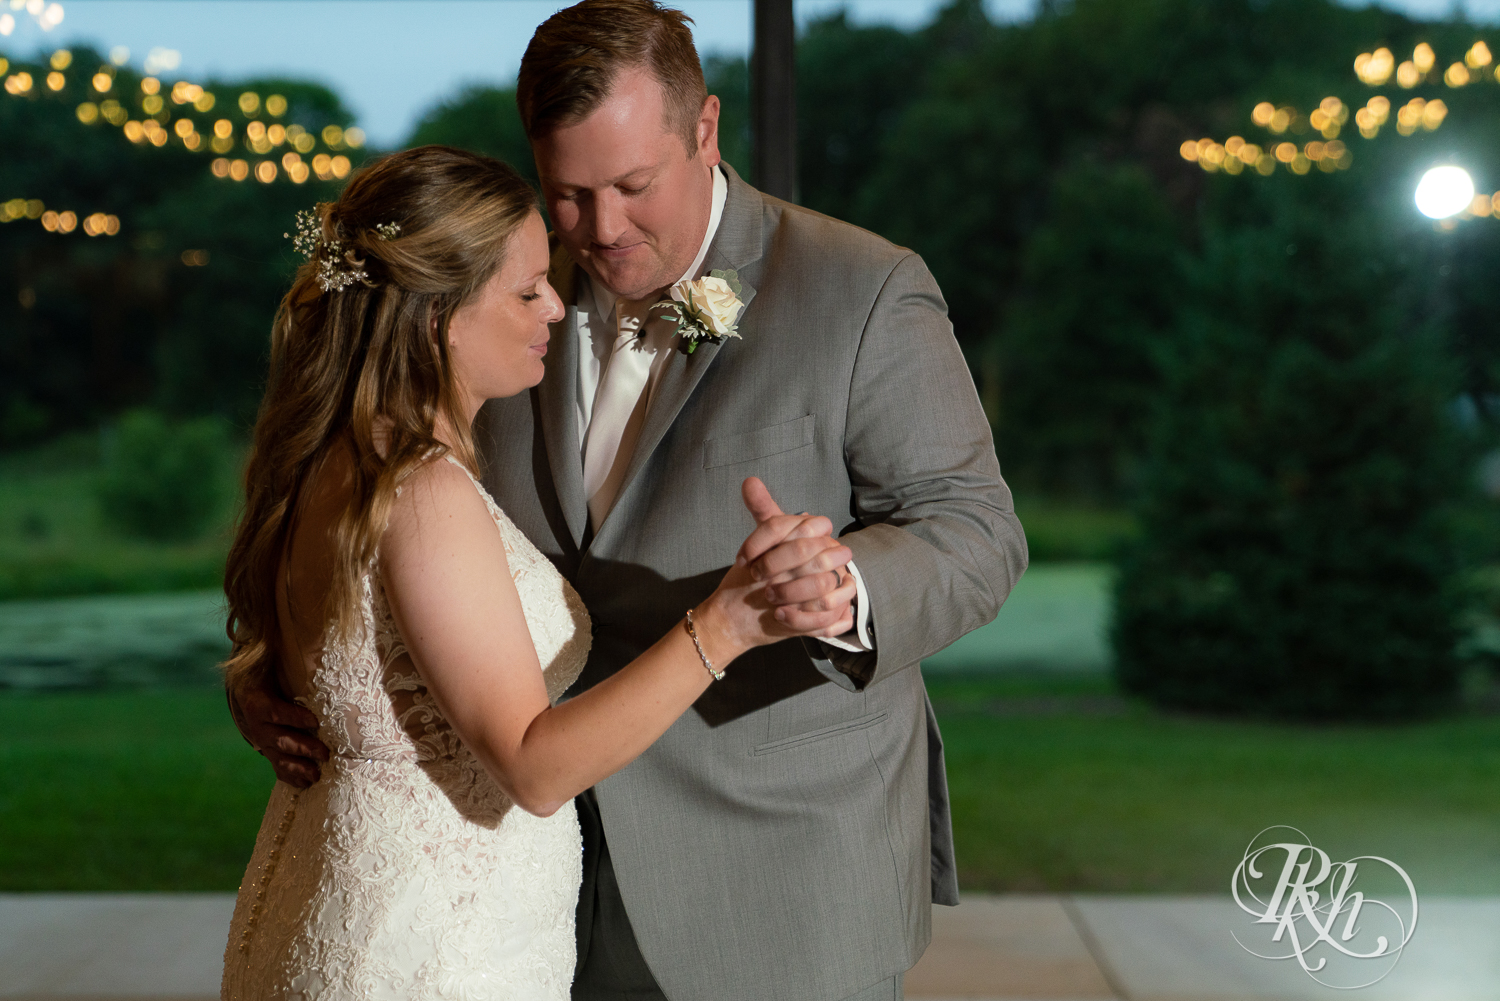 Bride and groom sharing first dance during wedding reception at 7 Vines Vineyard in Dellwood, Minnesota.